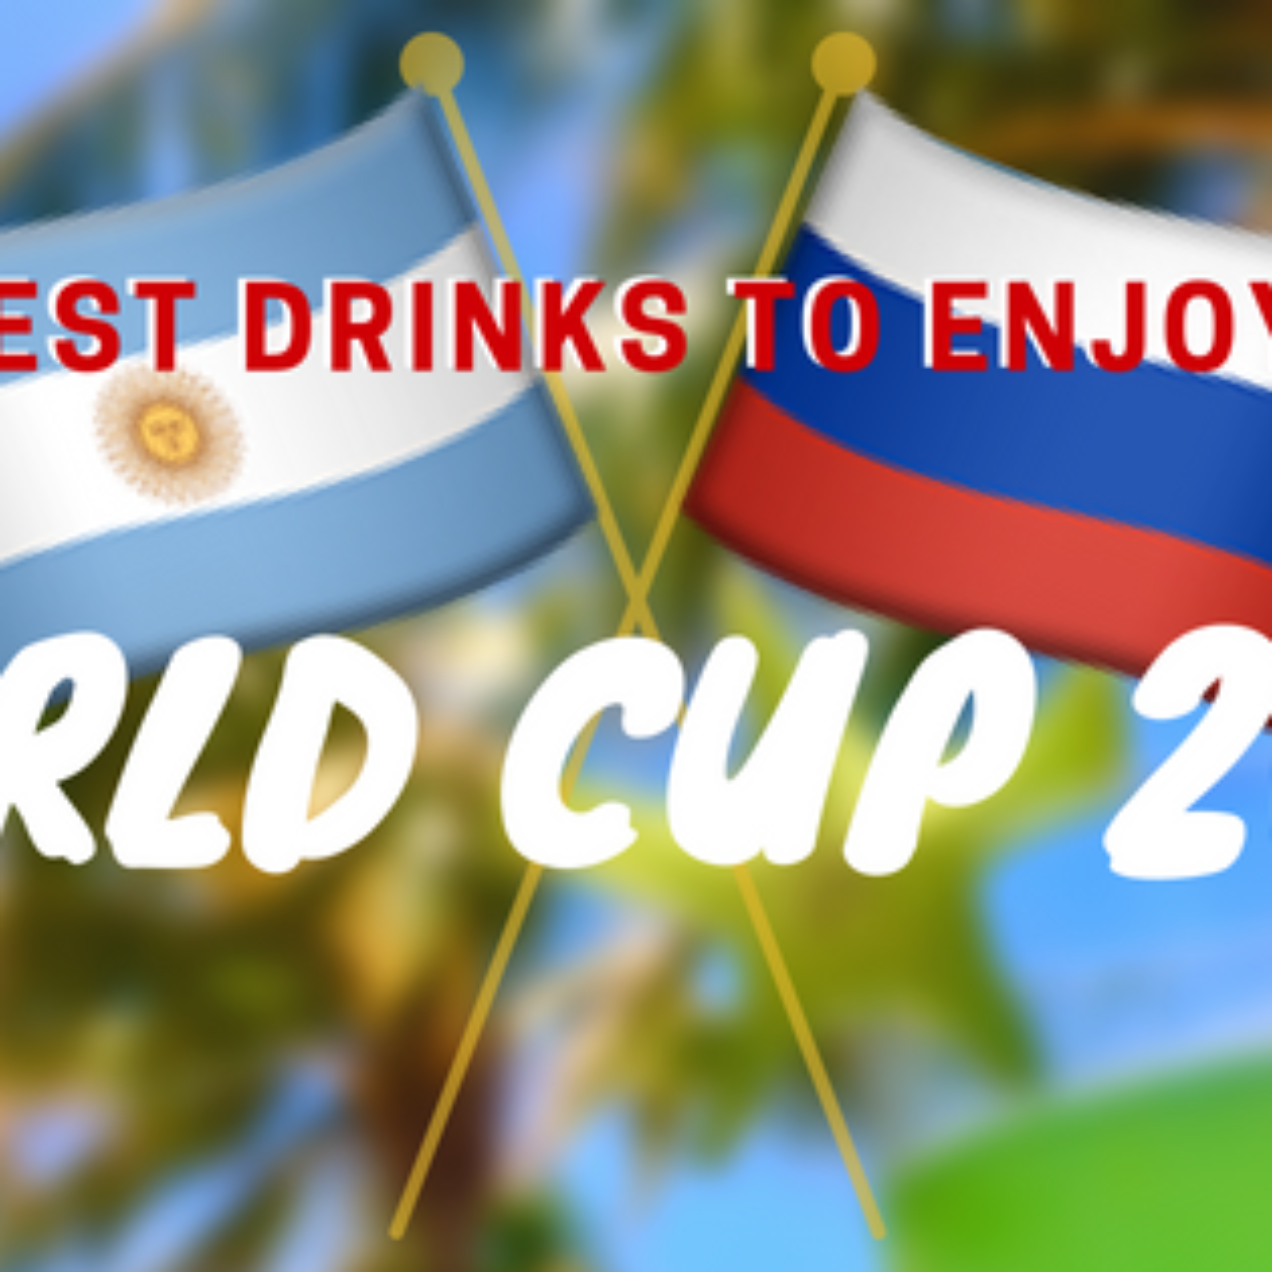 The Best Drinks for Enjoying the 2018 World Cup